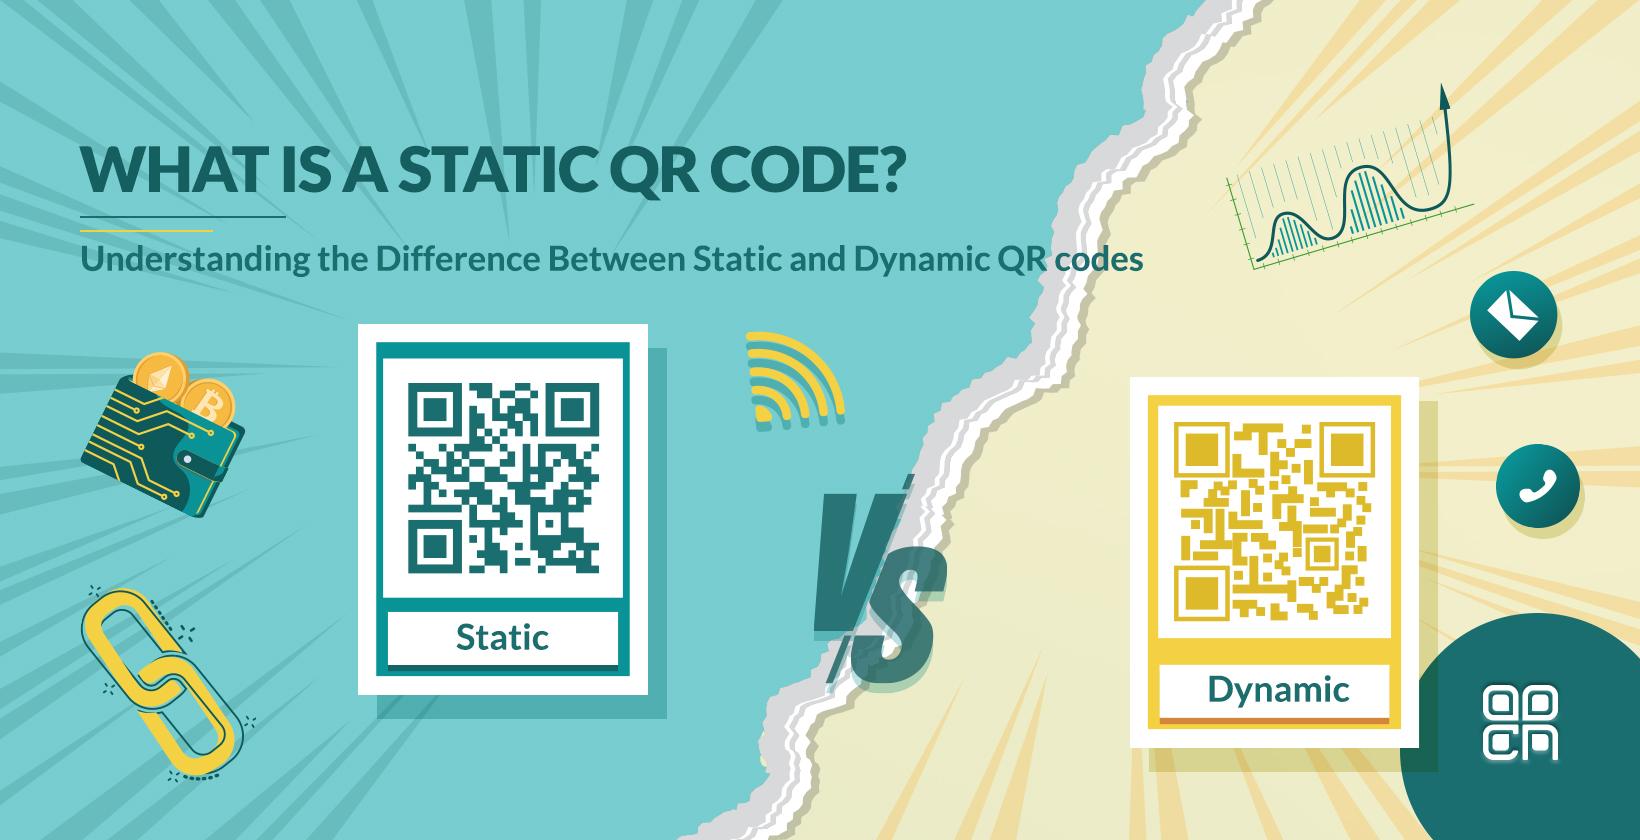 Static QR Codes: Definition, How It Works, Purpose, Use and How To Create It?